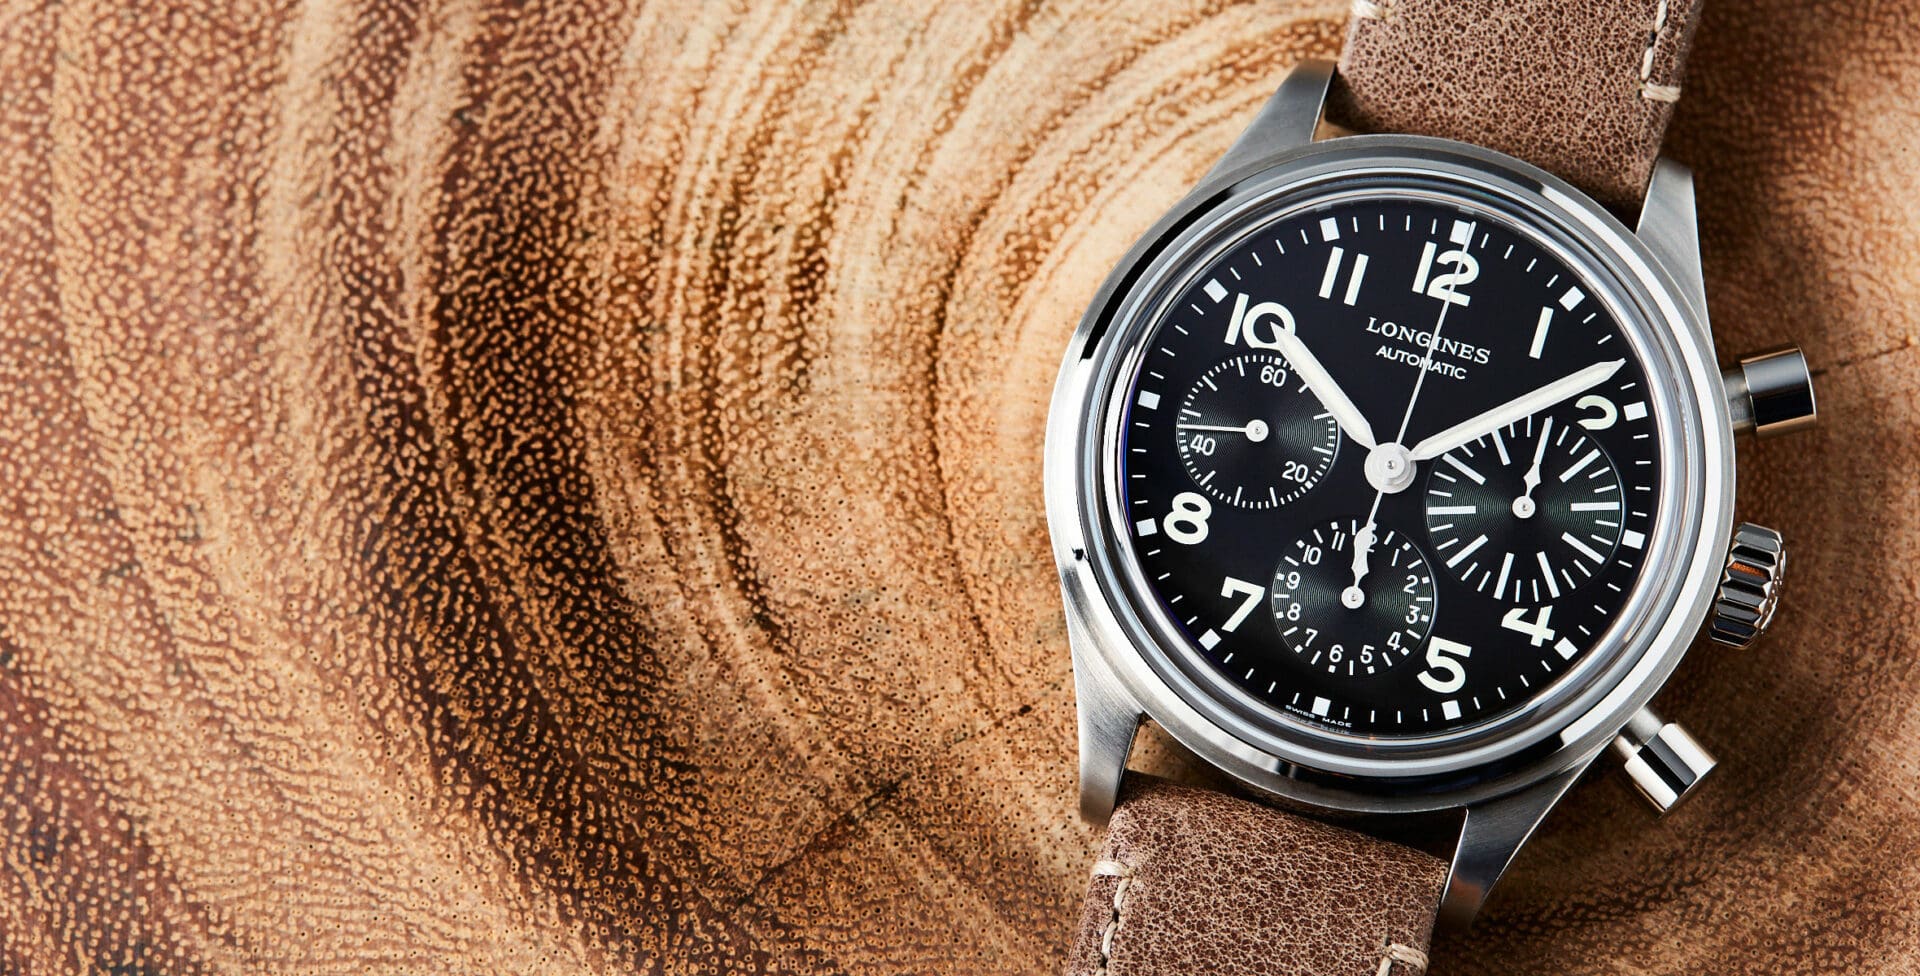 HANDS-ON REVIEW: Eyes on the prize – the Longines Avigation BigEye 